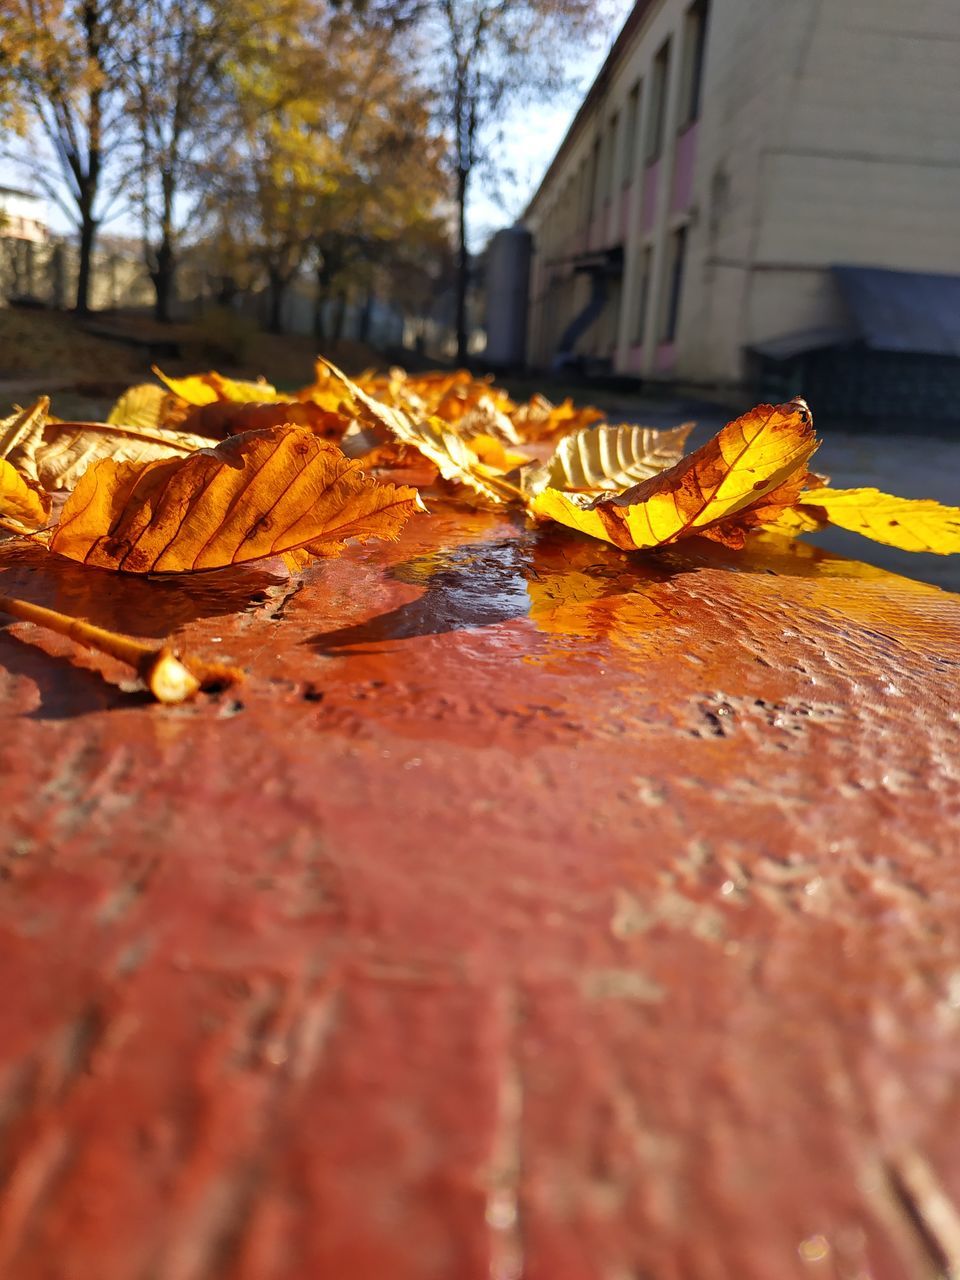 leaf, plant part, autumn, nature, change, no people, leaves, tree, falling, close-up, day, wood - material, orange color, selective focus, plant, yellow, outdoors, dry, wood, built structure, surface level